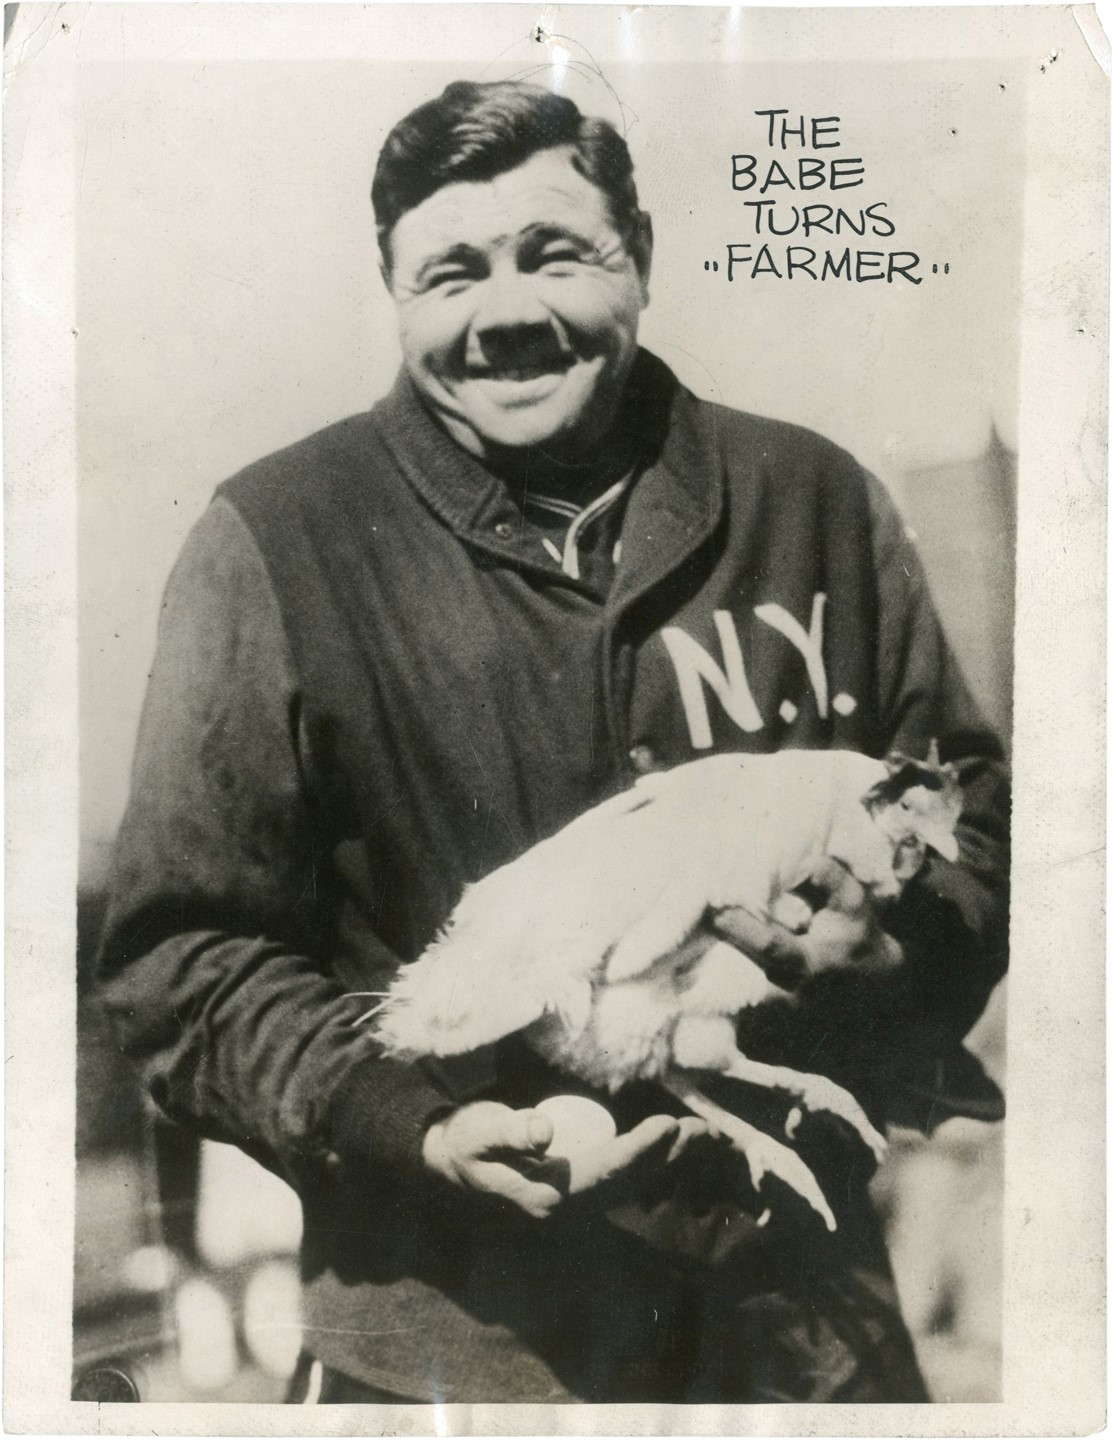 Ruth and Gehrig - Type I Babe Ruth - The Babe Turns "Farmer" Photo